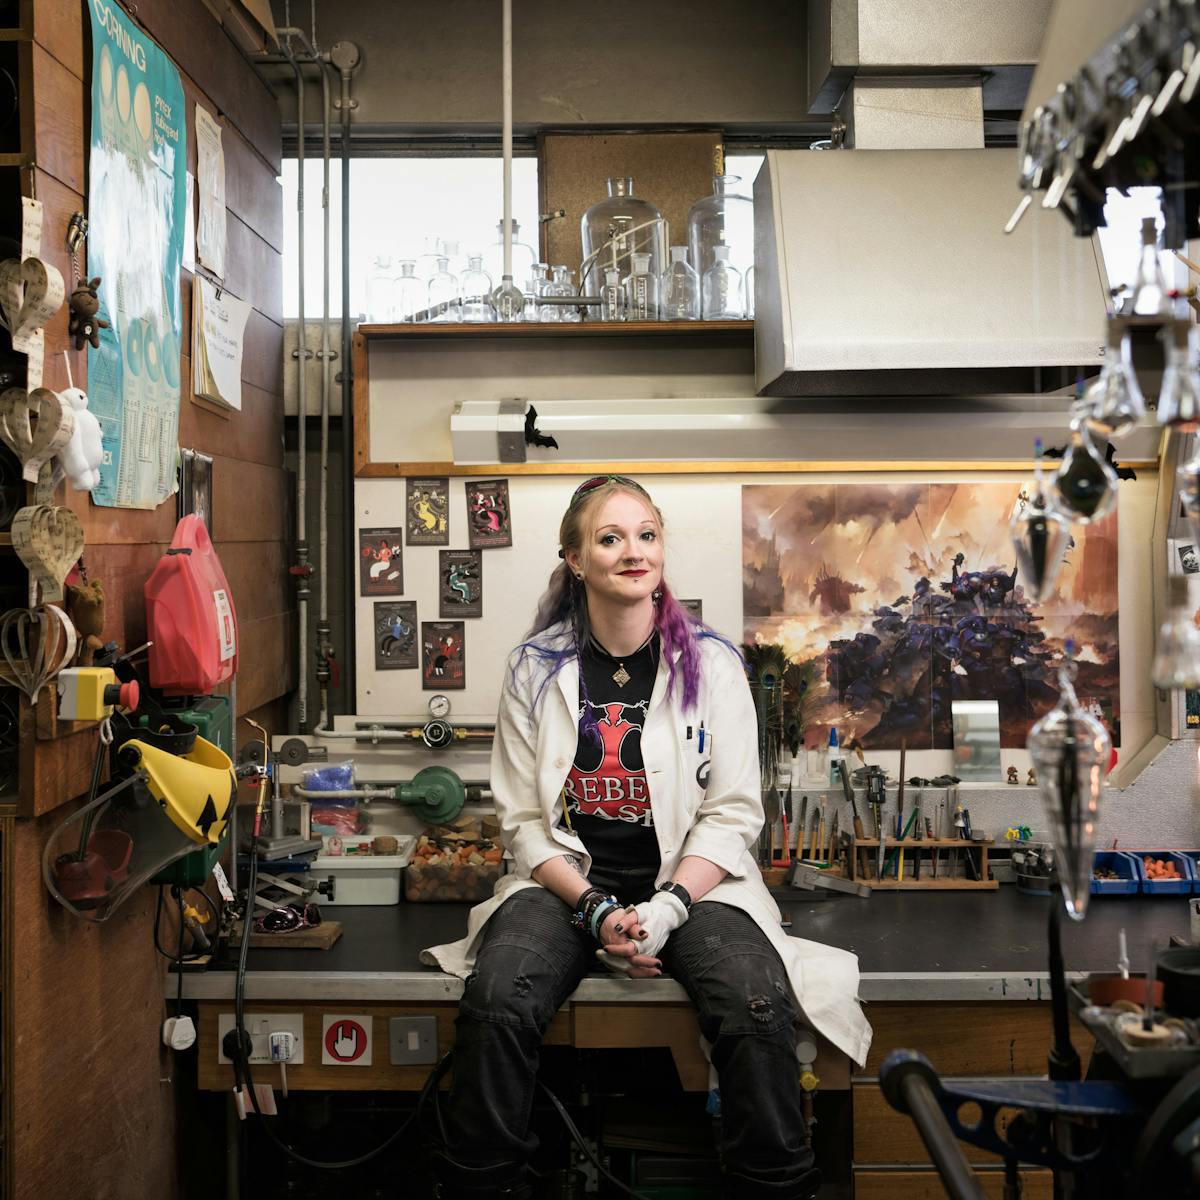 Picture of a woman sitting on a bench in a workshop wearing a white coat, with bright green sunglasses atop her head, blue and purple hair, and a black and red rock-logo t-shirt. Behind her are various glassblowing implements.